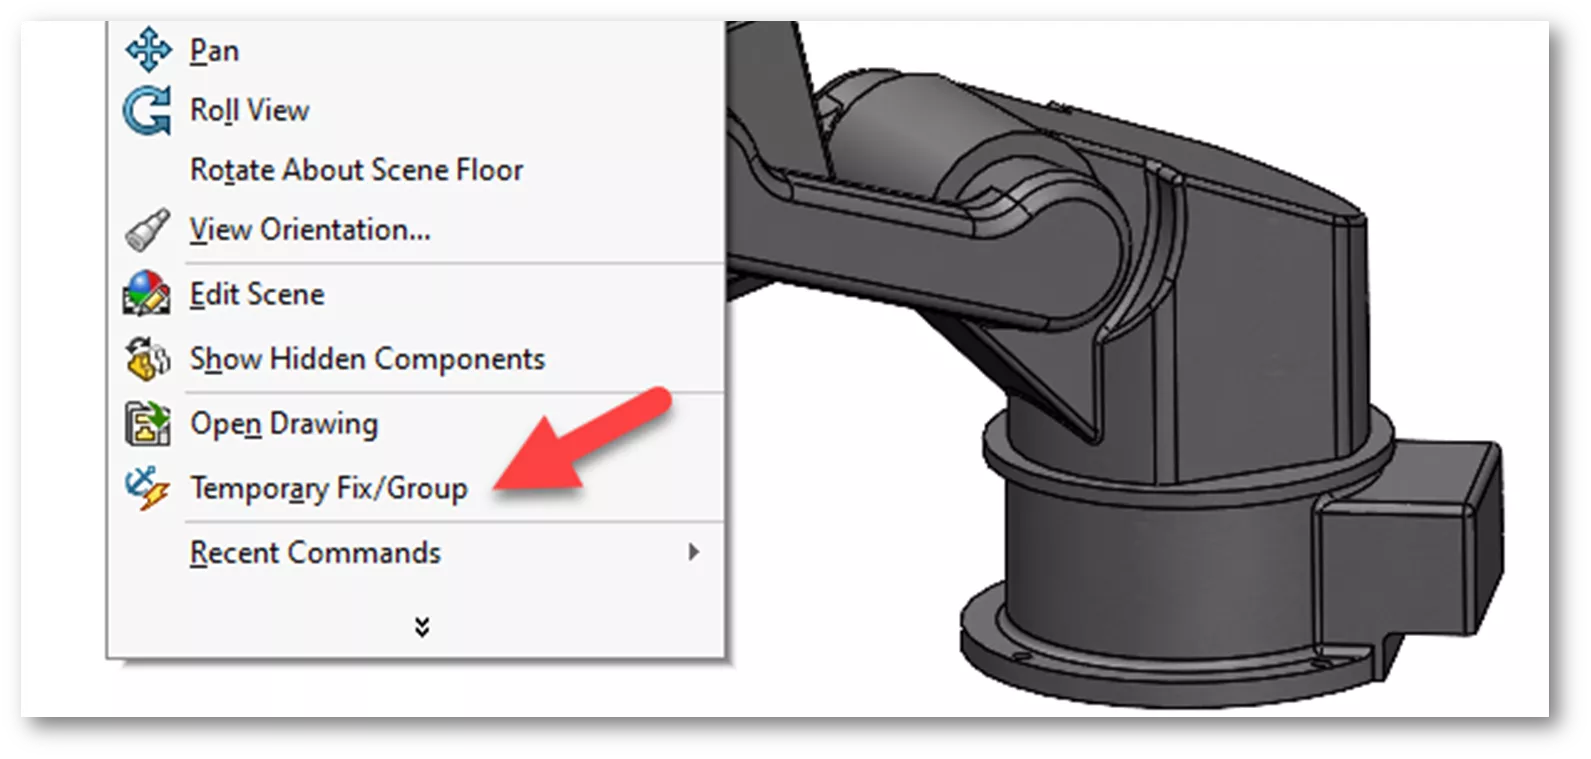 How to Use the Temporary Fix/Group Option in SOLIDWORKS 